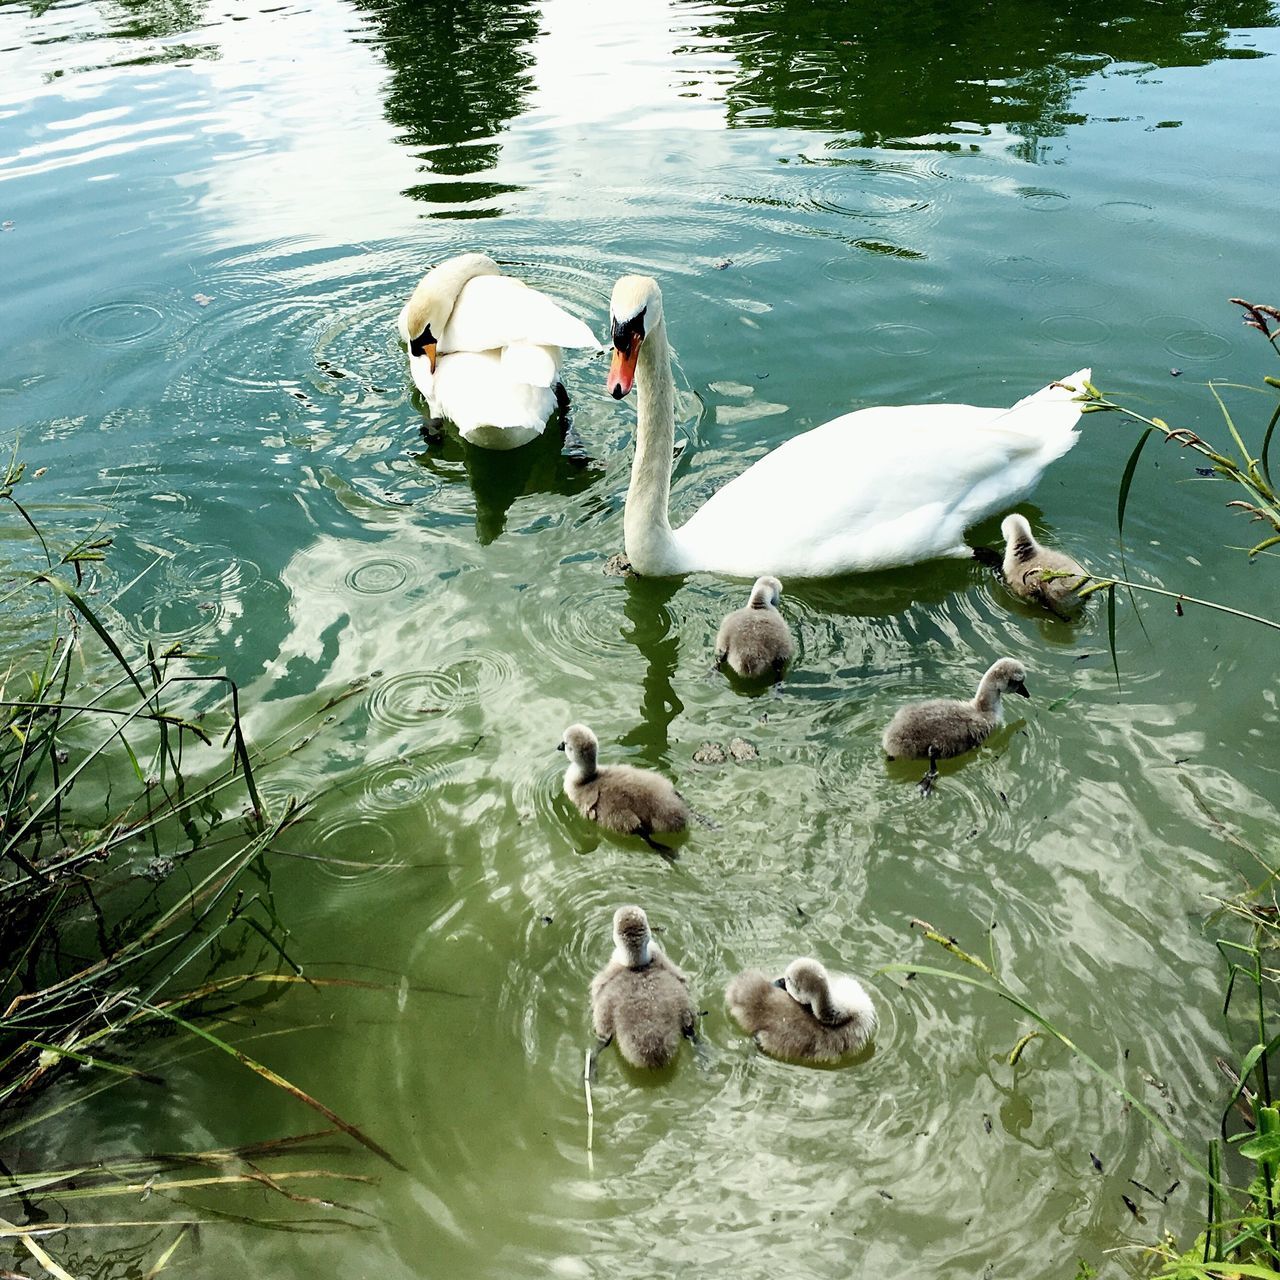 lake, water, animal themes, animals in the wild, bird, young bird, high angle view, young animal, swimming, day, swan, animal family, nature, no people, waterfront, togetherness, animal wildlife, outdoors, water bird, cygnet